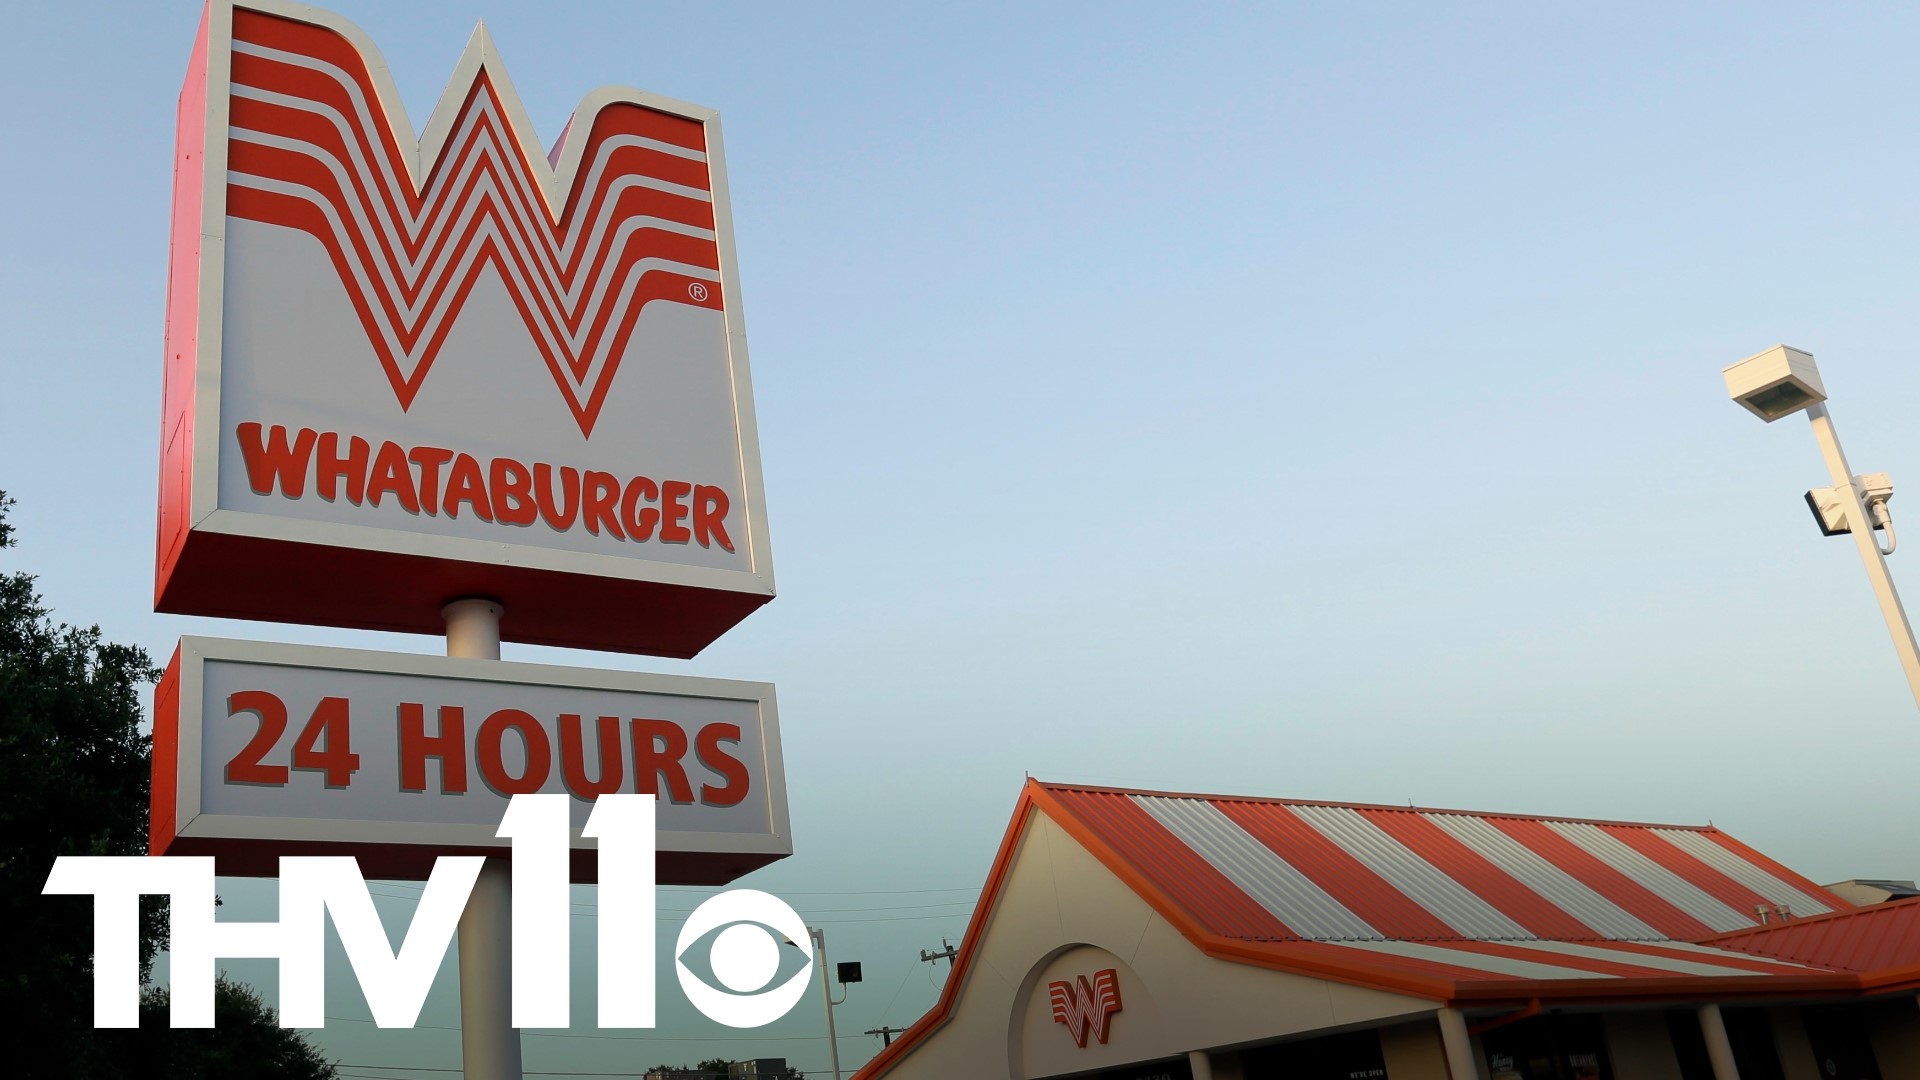 Whataburger, the popular fast-food restaurant chain, will be making its way to Little Rock soon! Here's what we know so far about the city's latest addition.